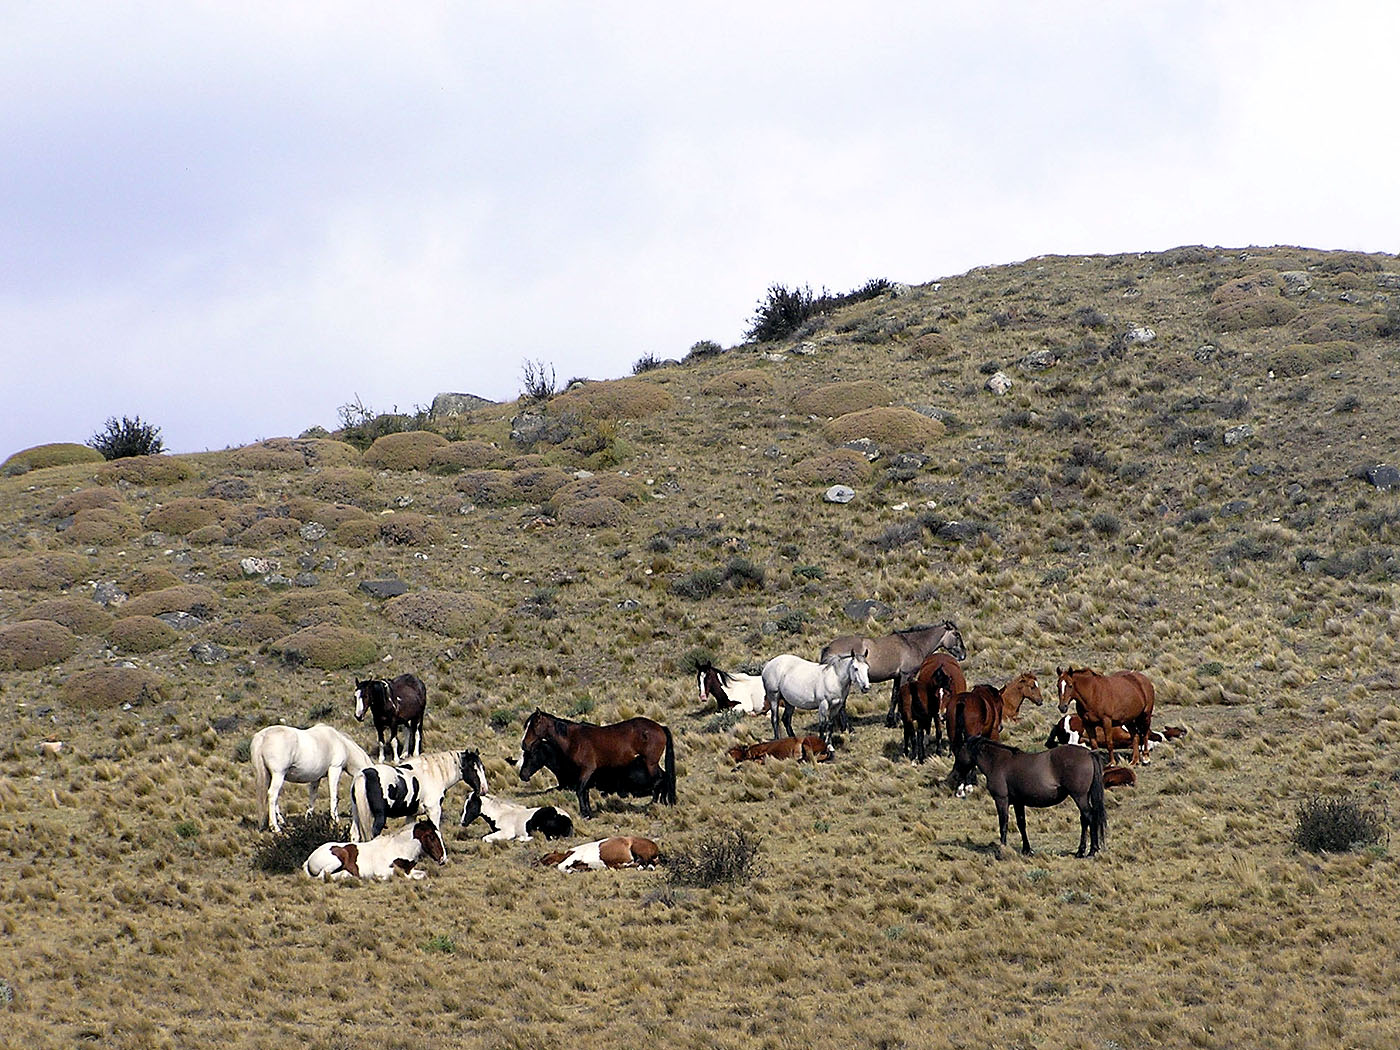 Patagonian Wild Horses near Puerto Natales, Chile